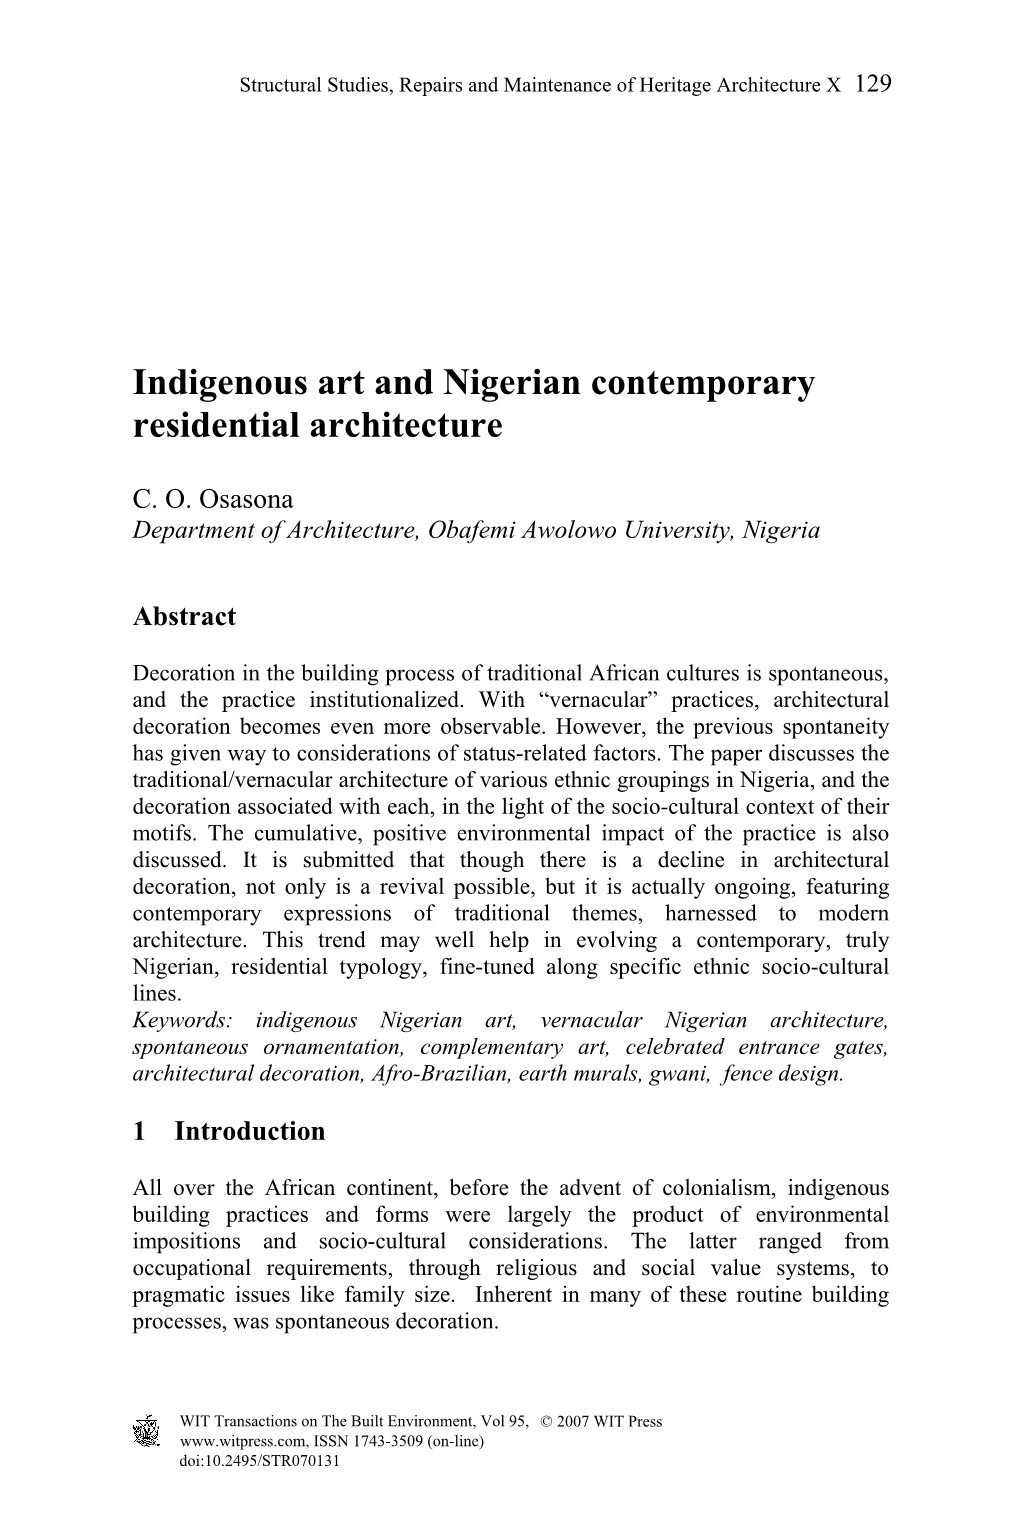 Indigenous Art and Nigerian Contemporary Residential Architecture